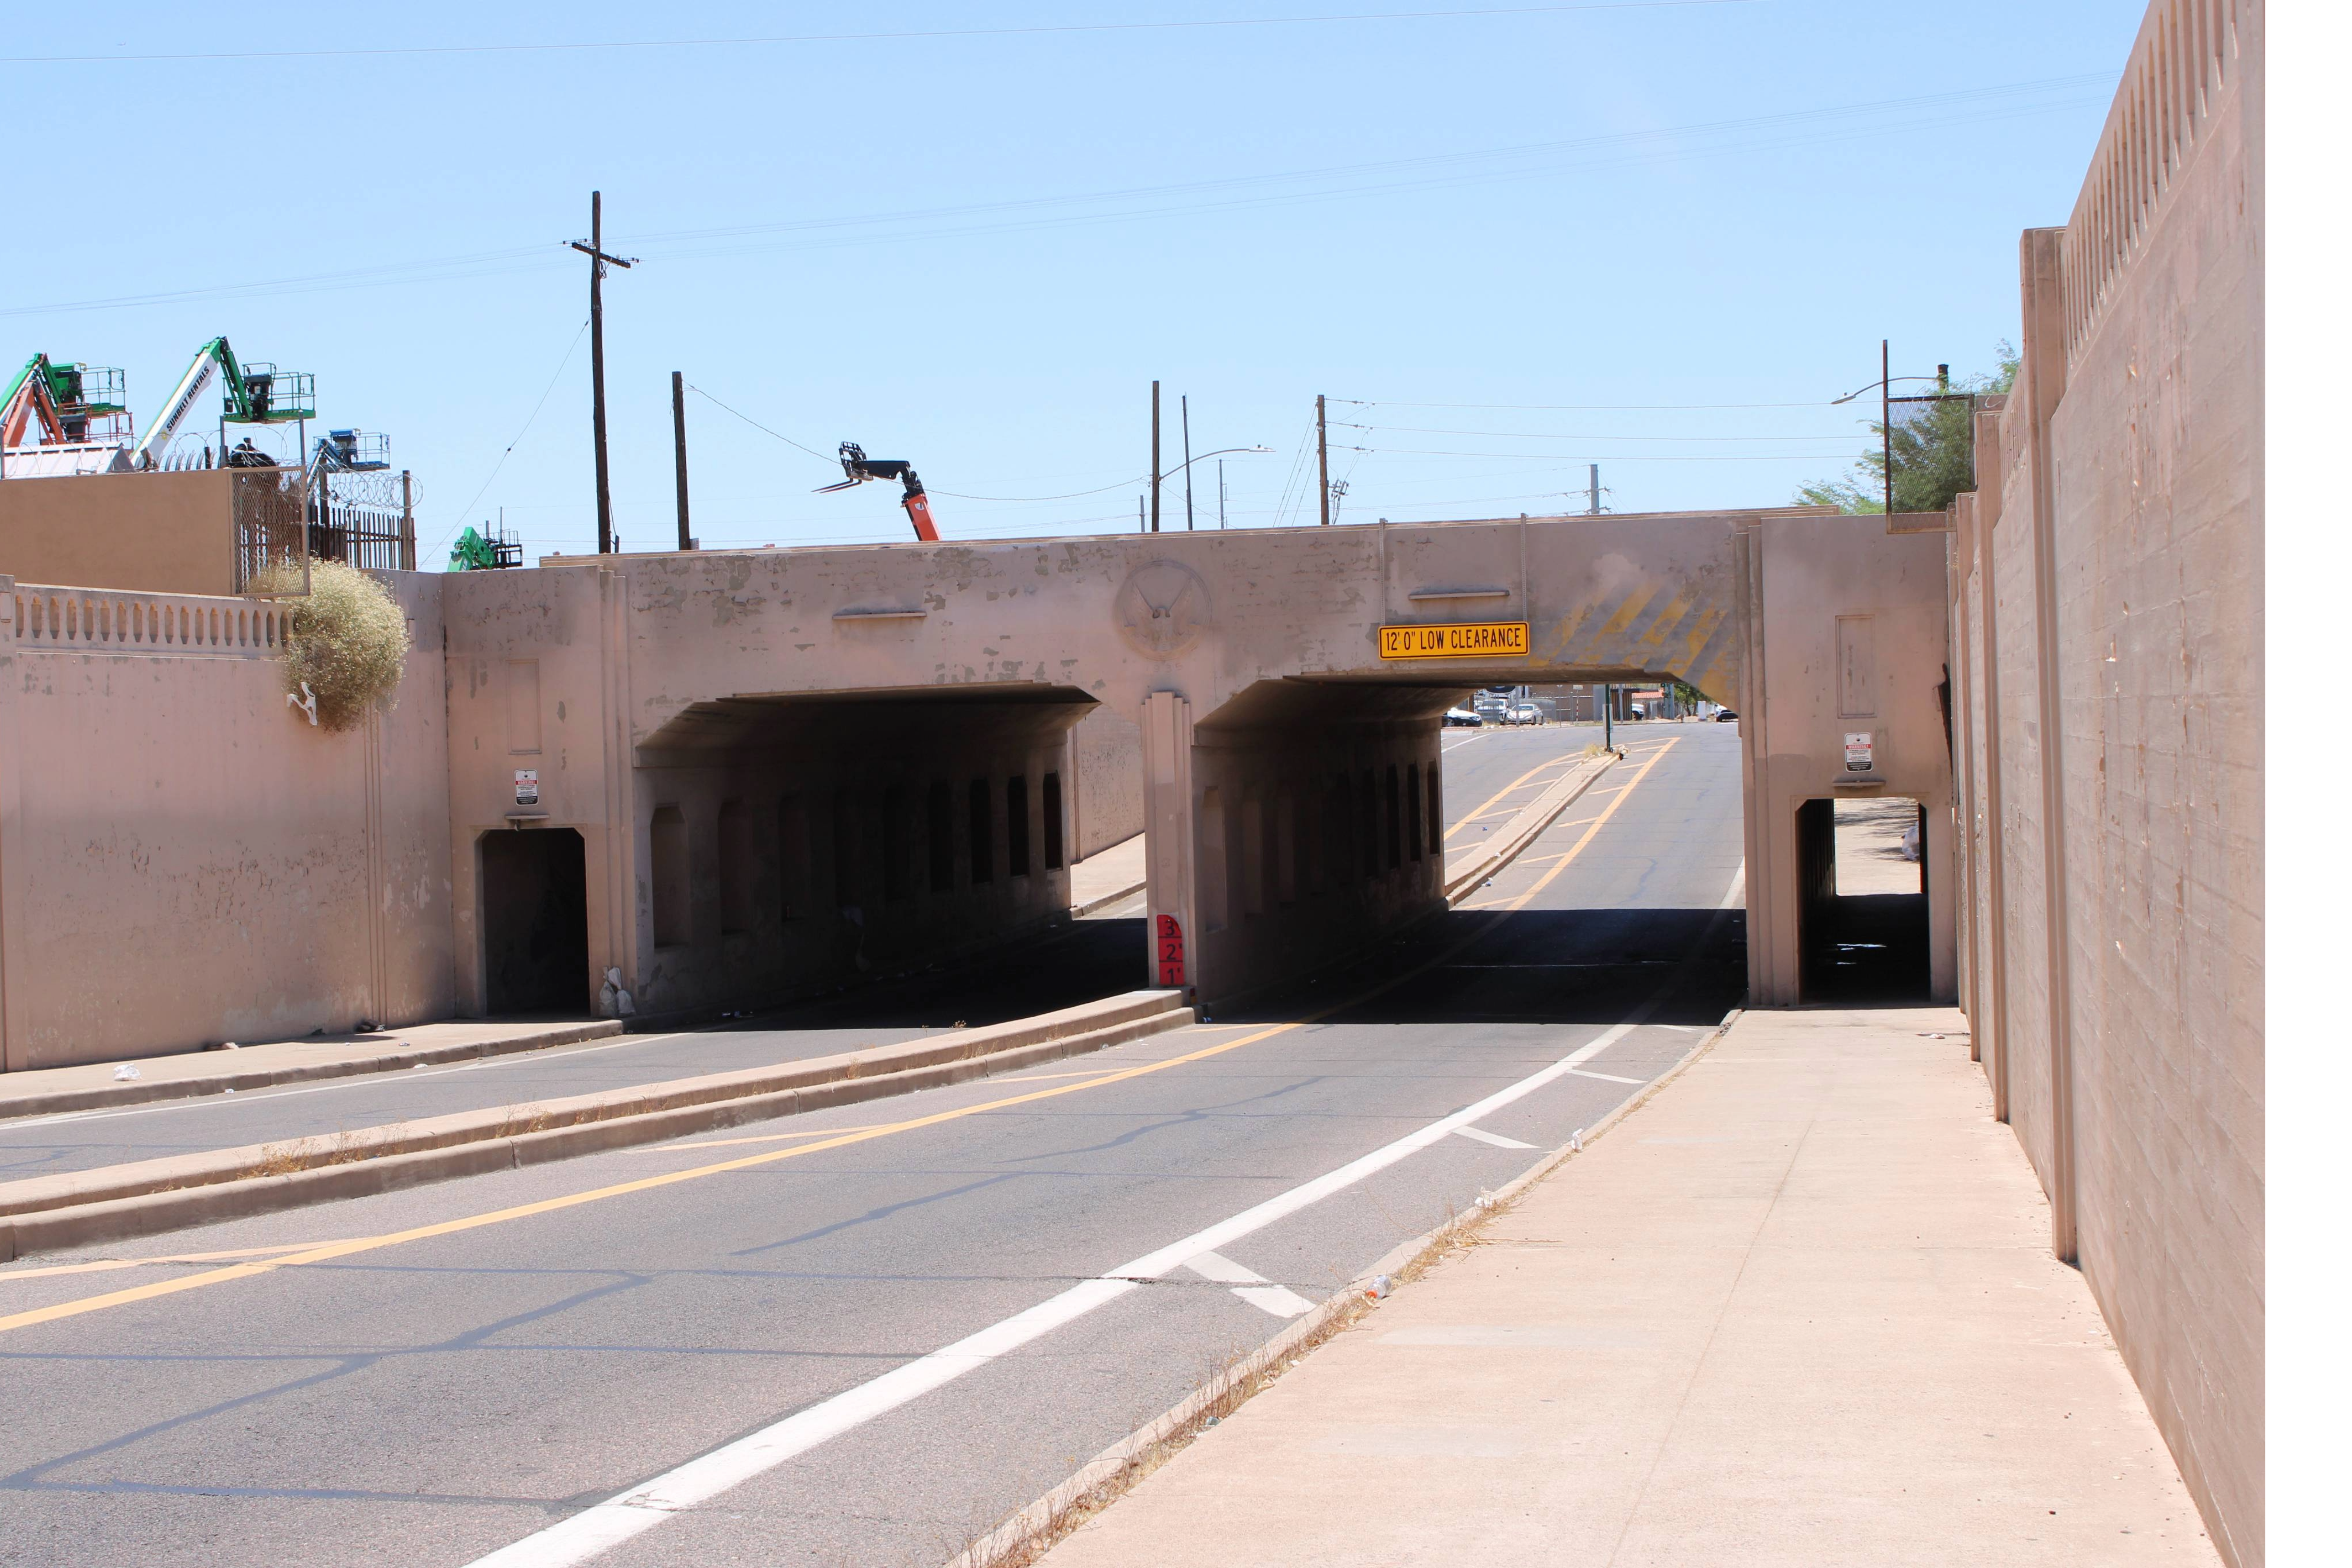 A roadway with two low-clearance underpasses, bordered by a sidewalk and a fence, stretches into the distance under a bright, clear sky.